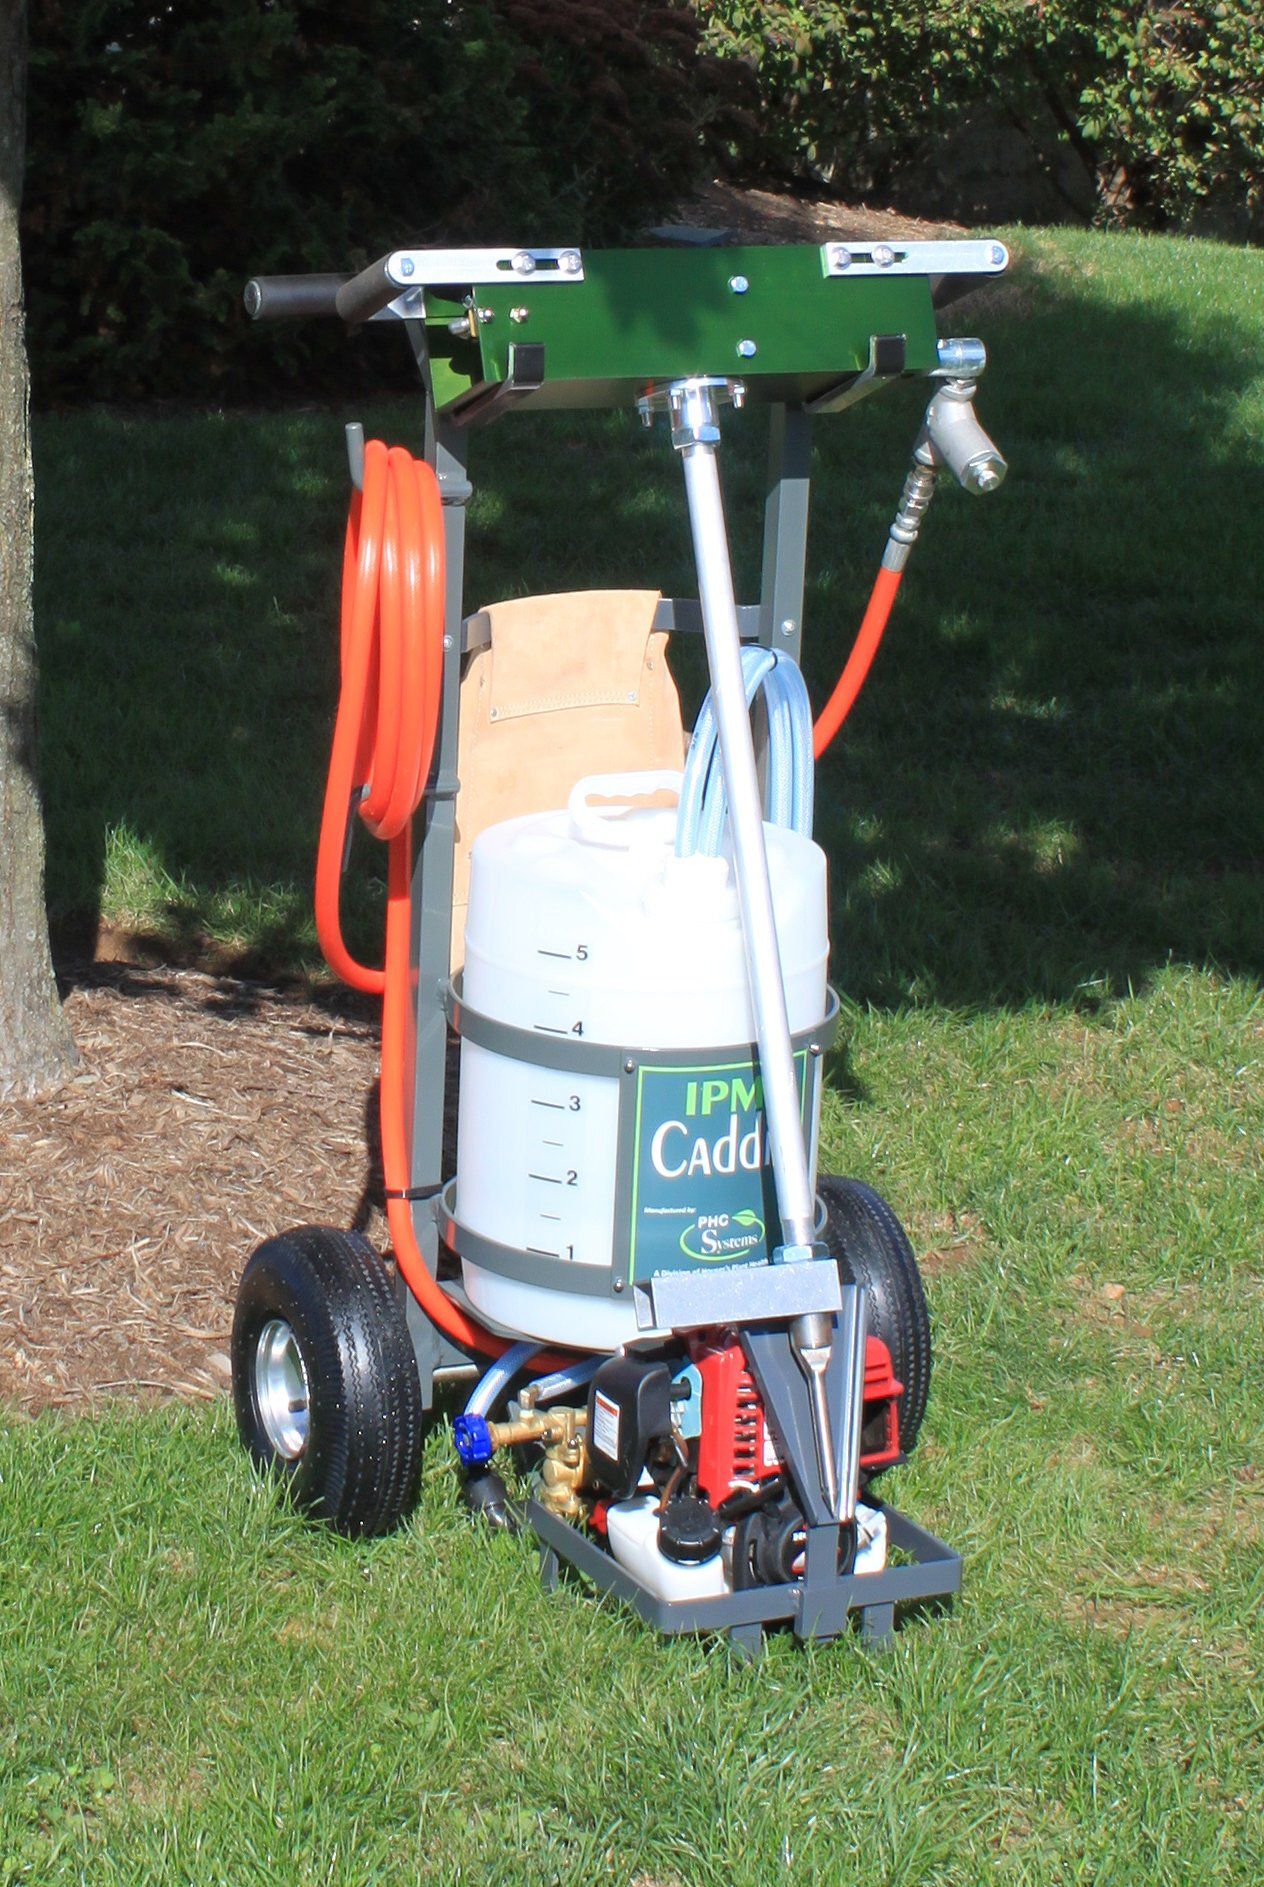 A cart with a propane tank and a hose attached to it